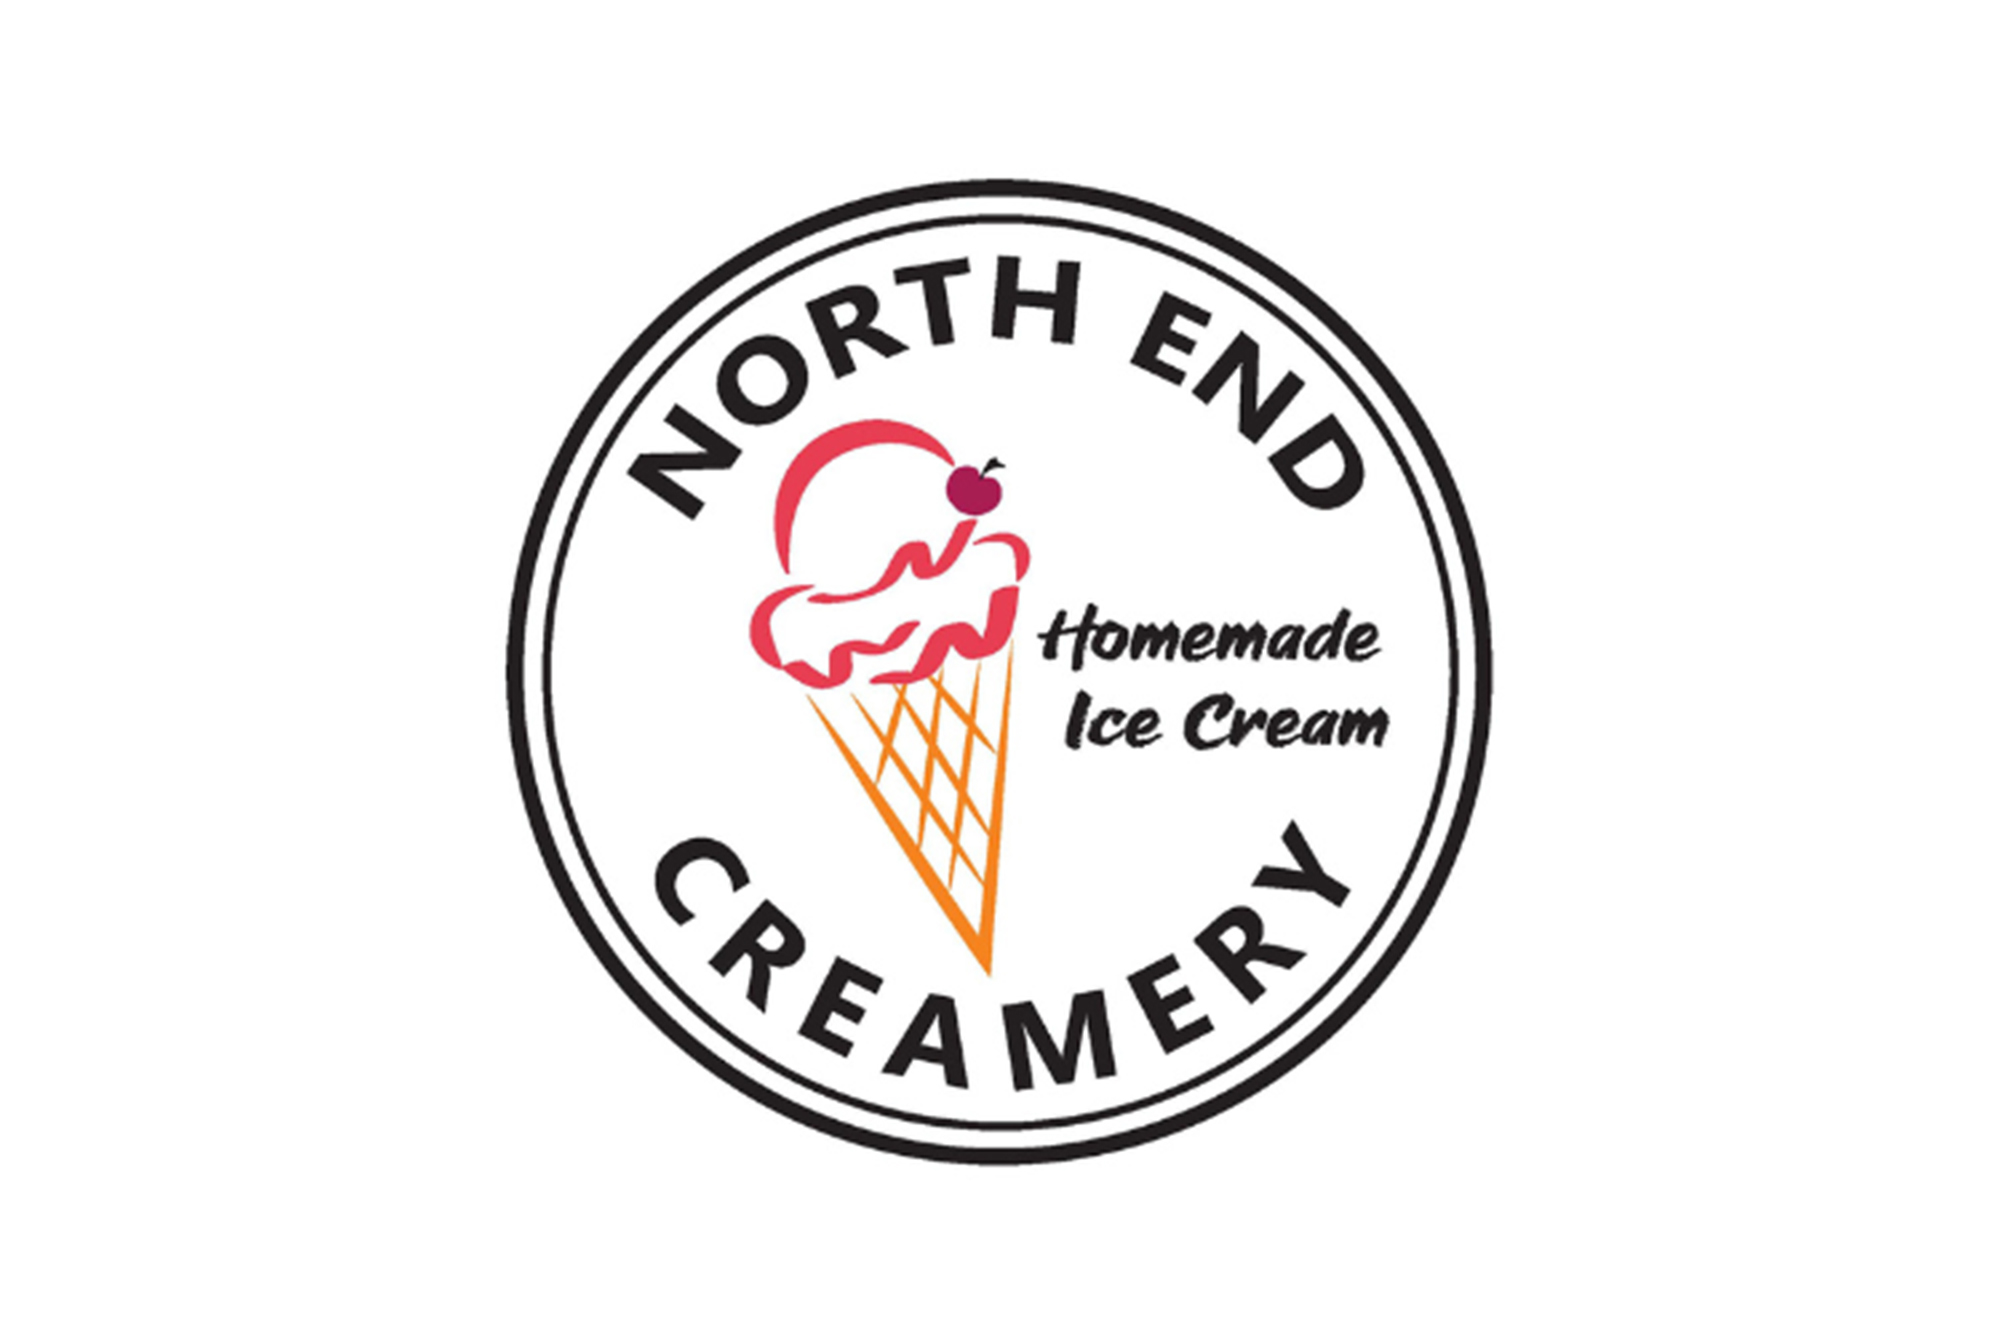 Photo: A white background with a circle logo ontop with the text NORTH END CREAMERY and a drawn out ice cream cone on it.